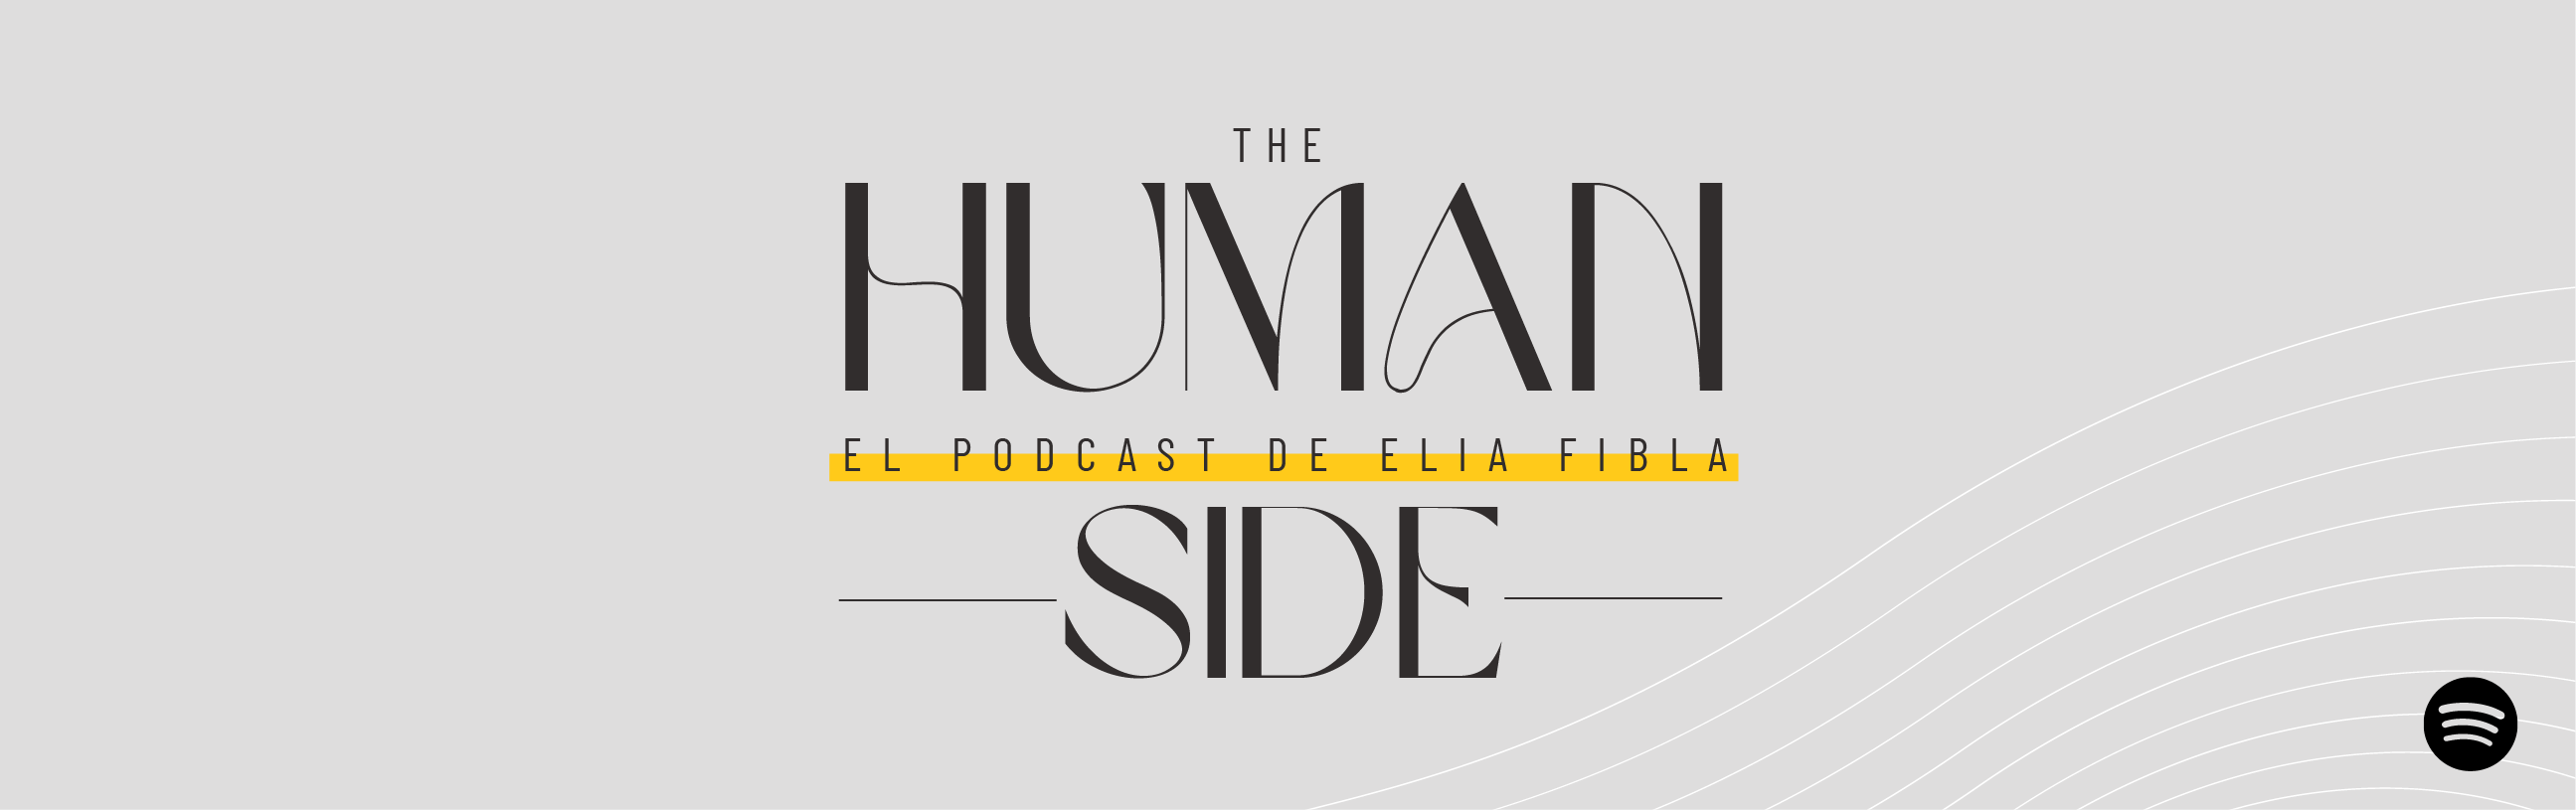 PODCAST THE HUMAN SIDE